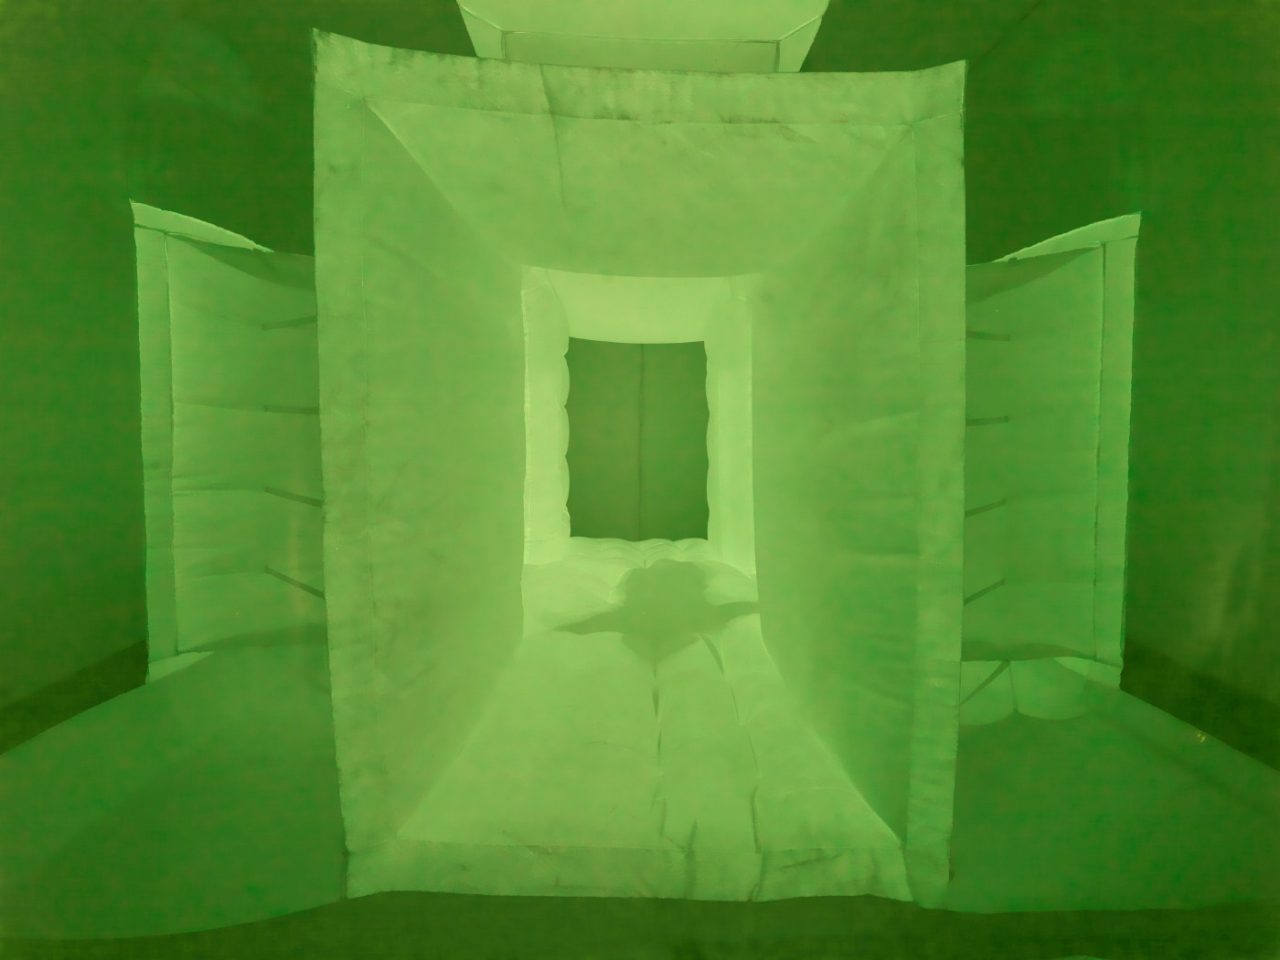 A green fabric with the shadow of a person moving through it